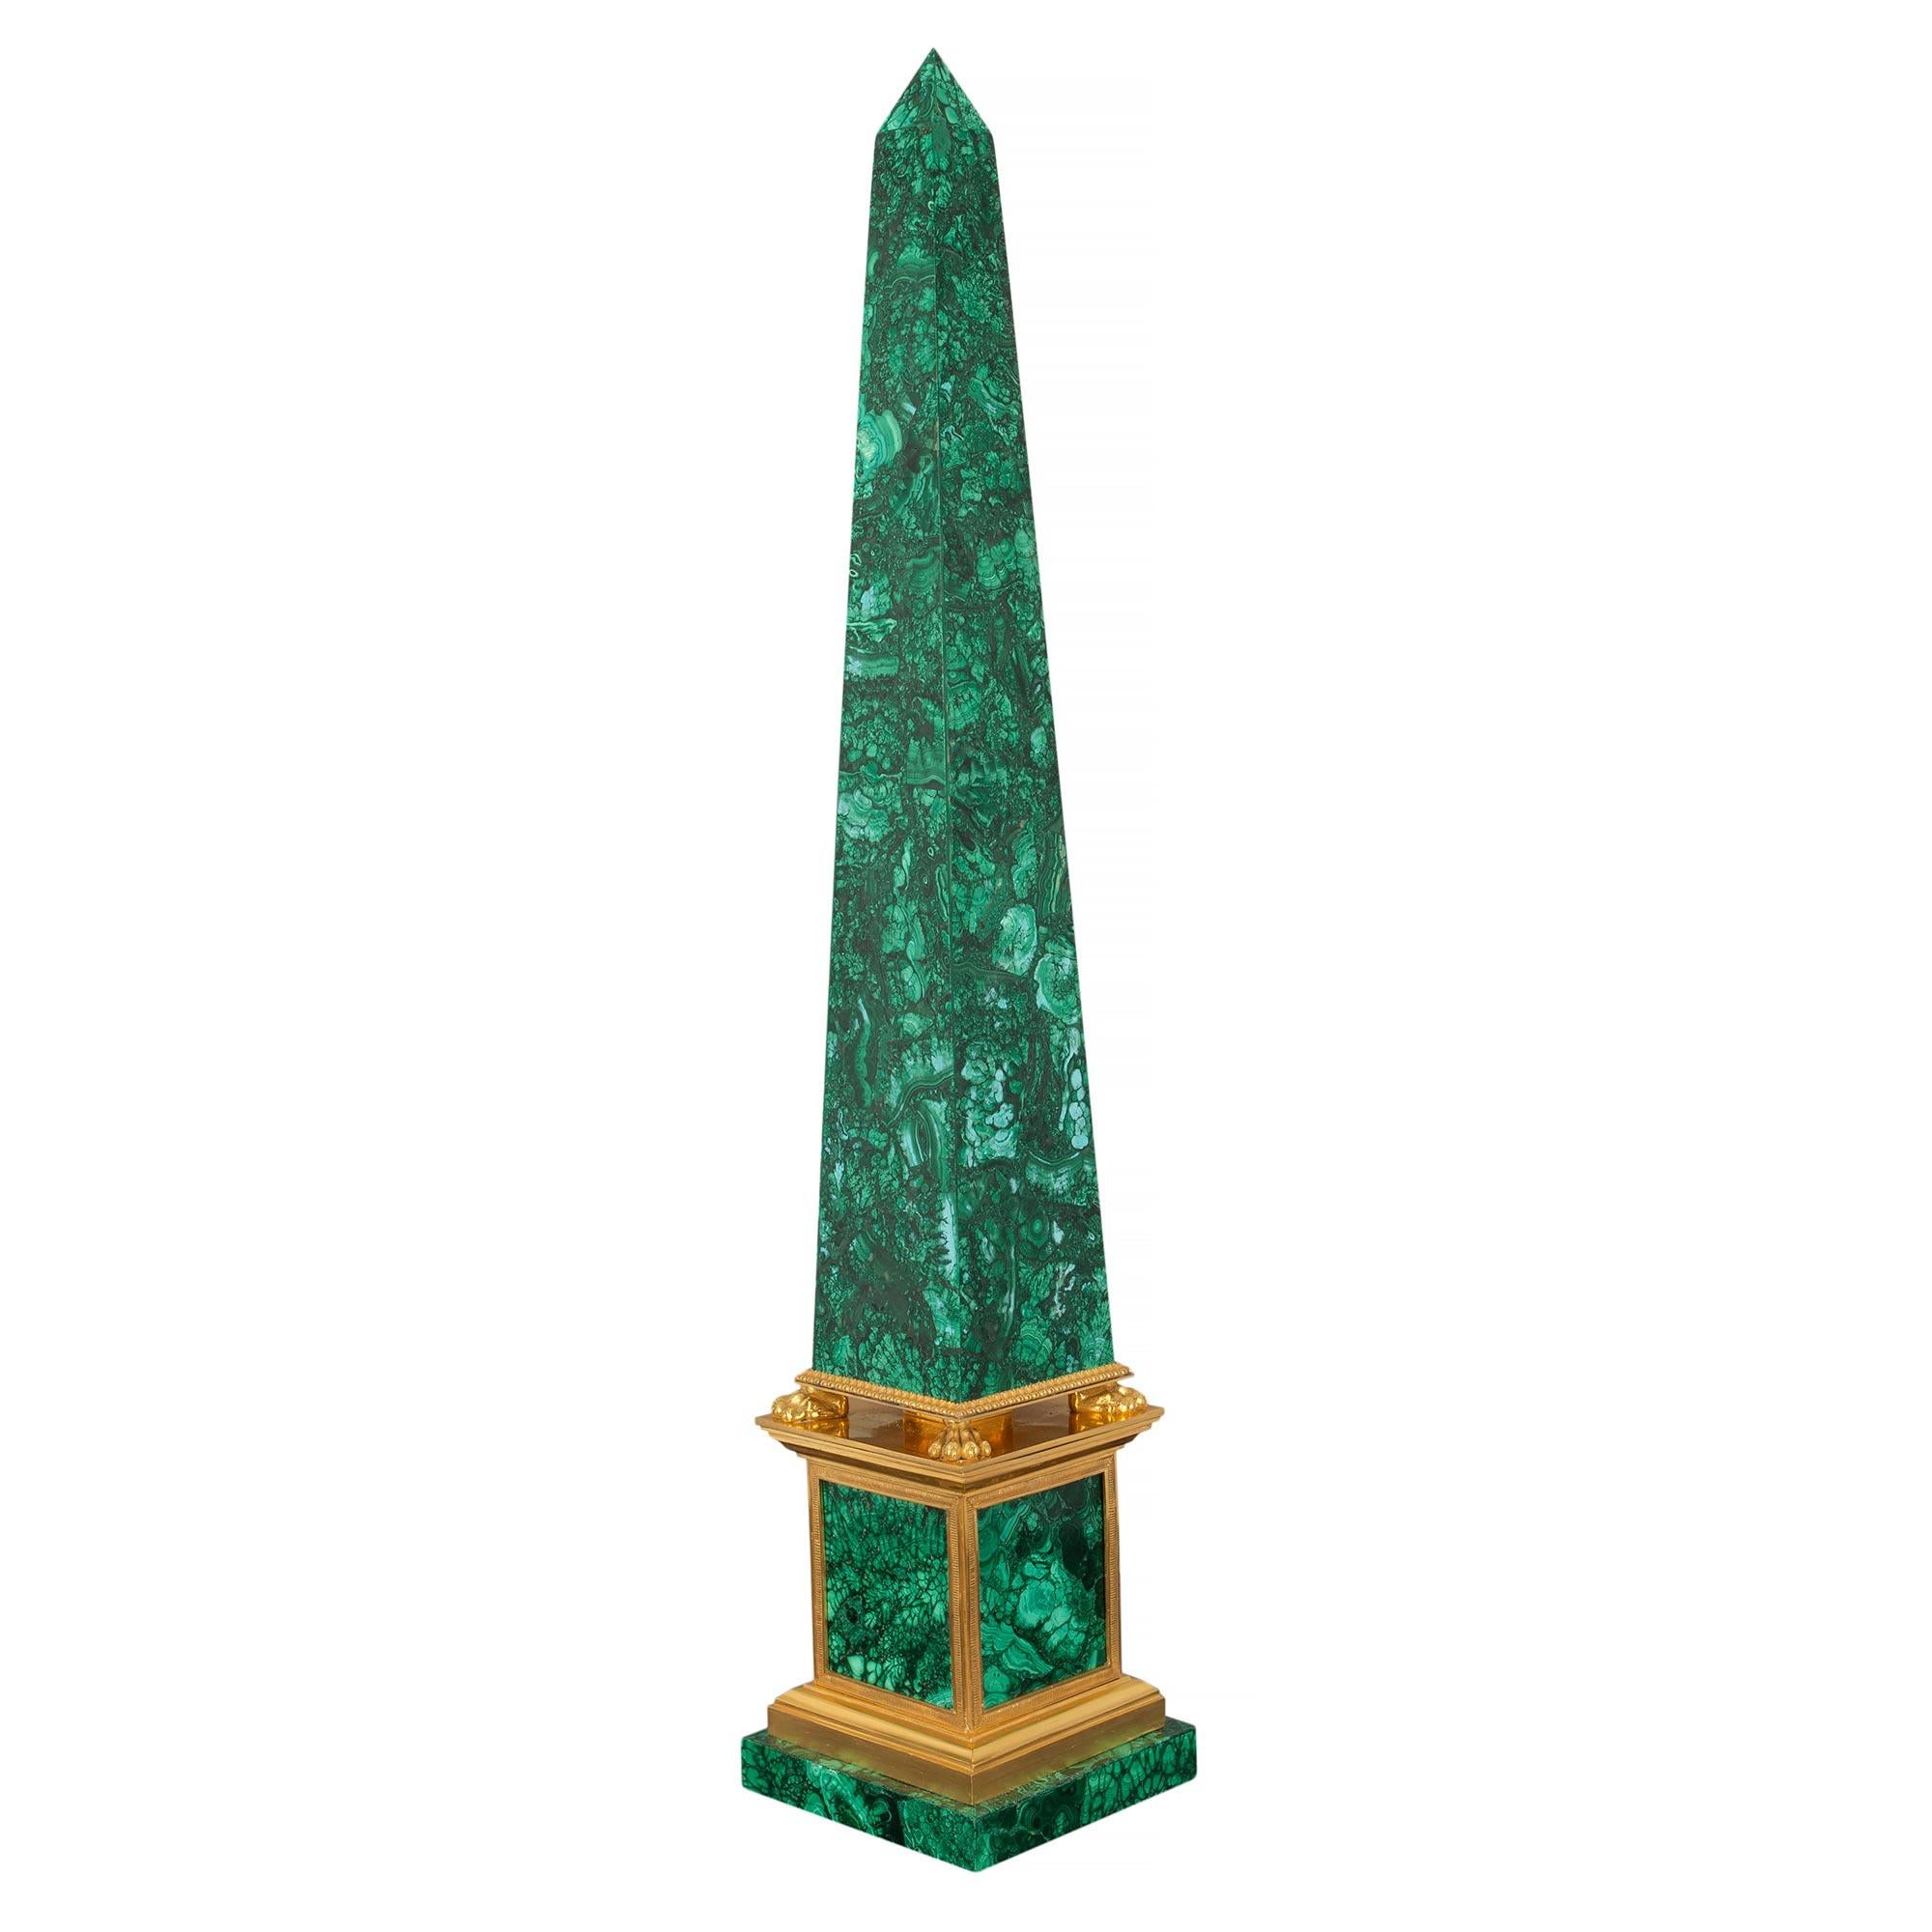 Pair of Italian 19th Century Neo-Classical St. Malachite and Ormolu Obelisks In Good Condition For Sale In West Palm Beach, FL